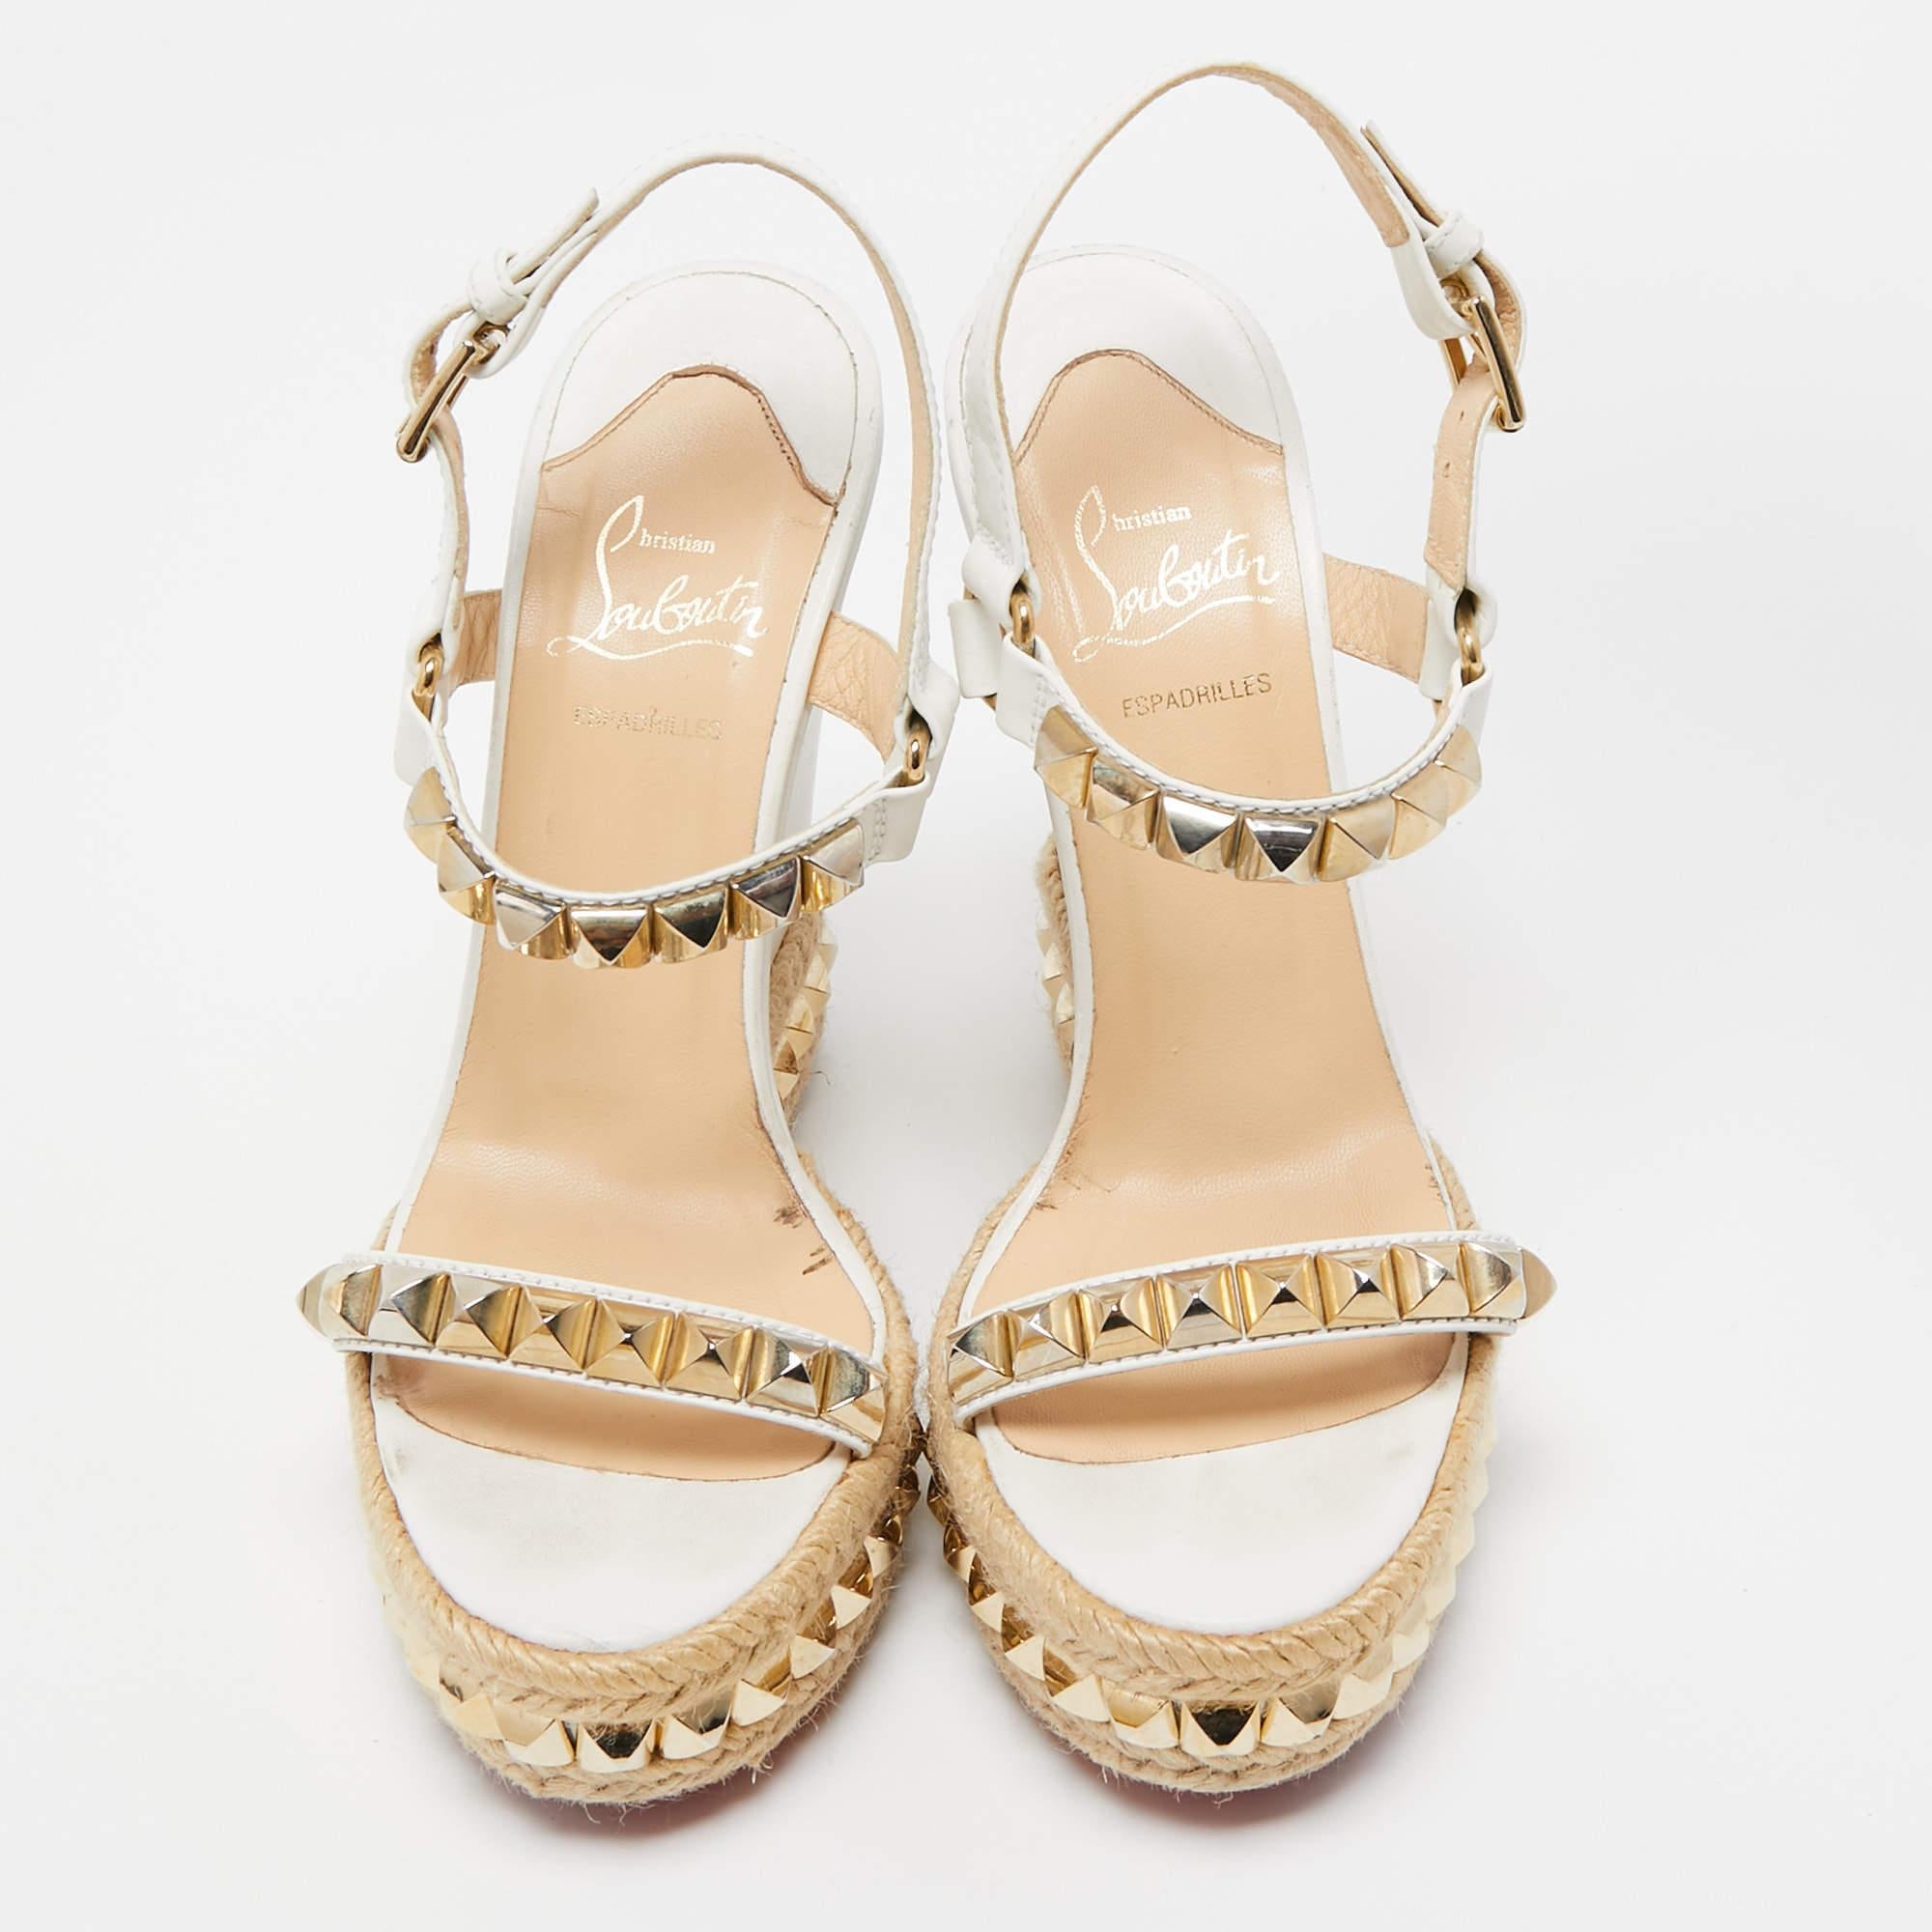 Make a statement with these Christian Louboutin sandals for women. Impeccably crafted, these chic heels offer both fashion and comfort, elevating your look with each graceful step.

